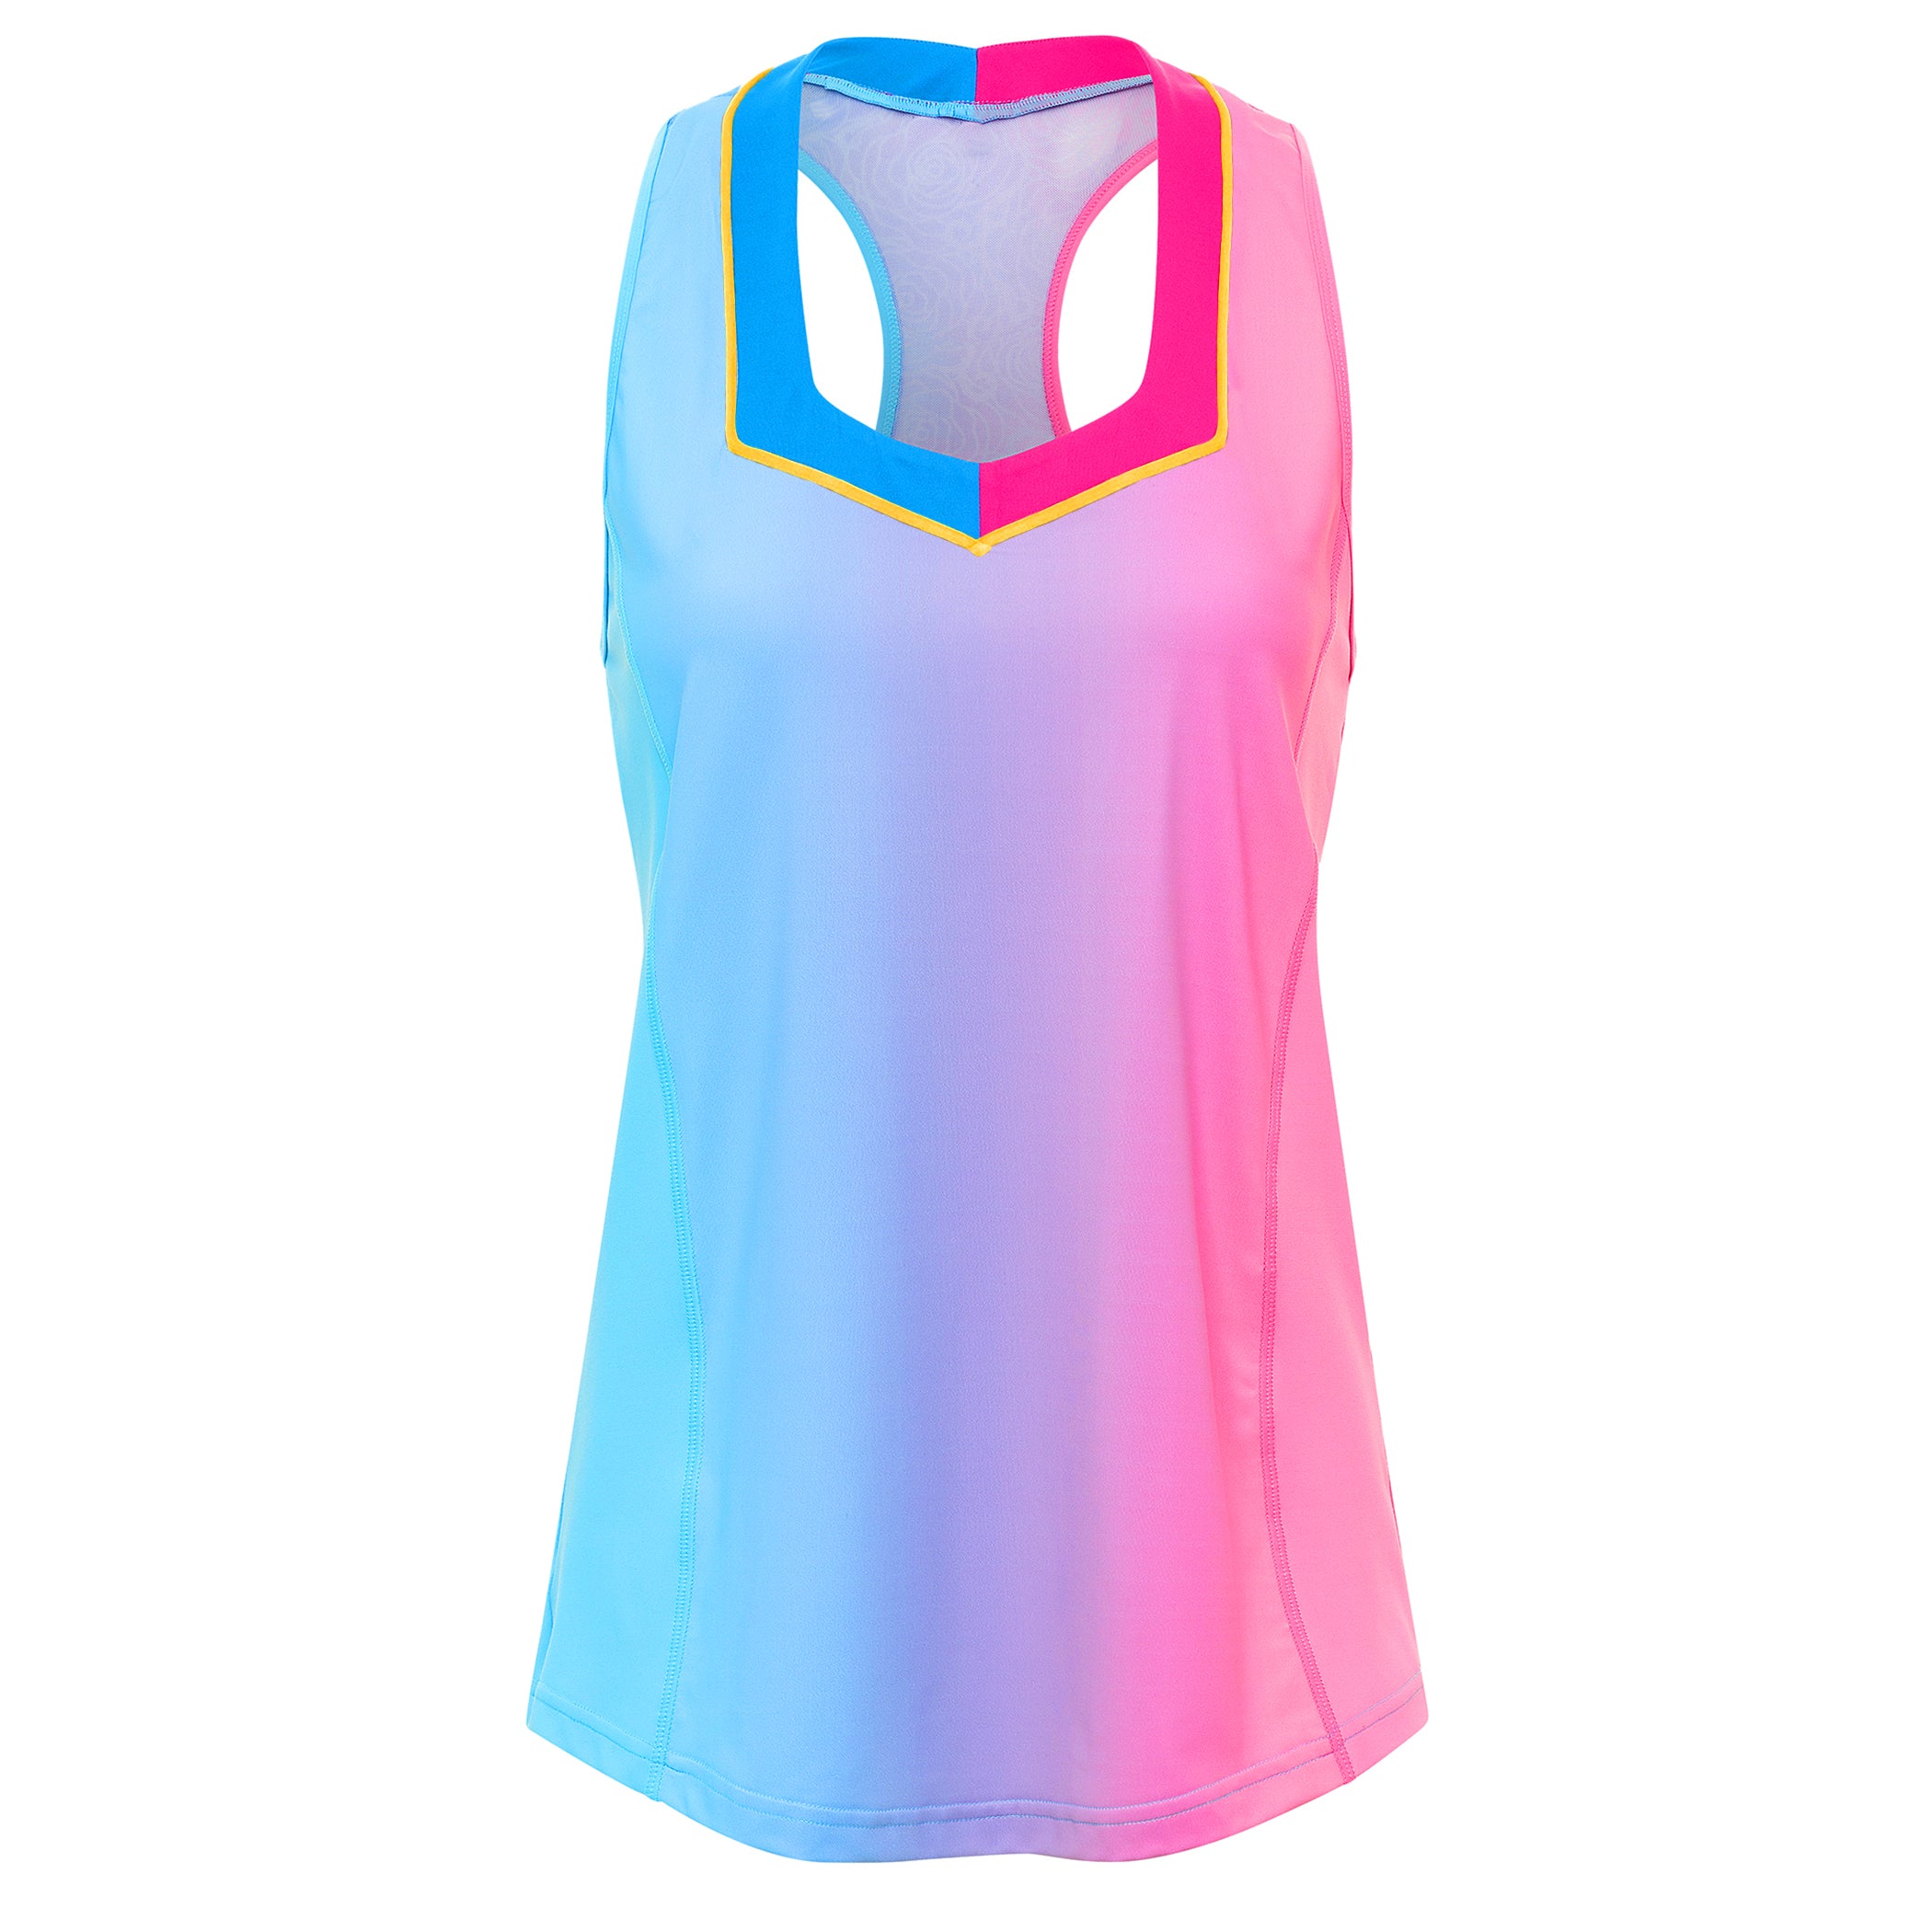 After Midnight Princess Tank Top  Crowned Athletics – Crowned Athletics™